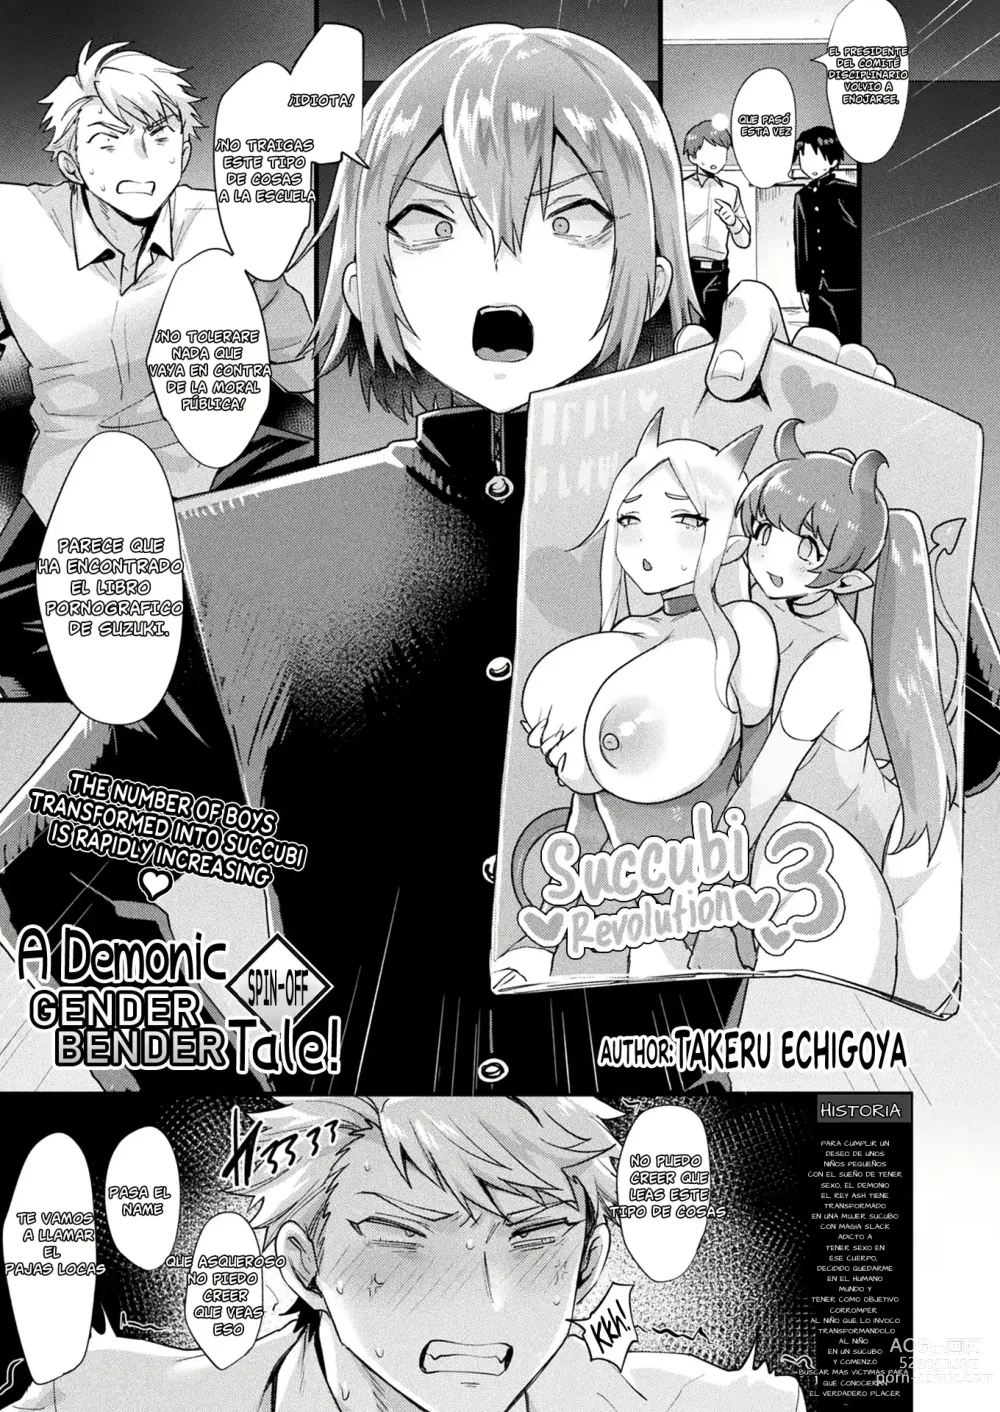 Page 1 of manga A Demonic Gender Bender Tale! Spin-Off